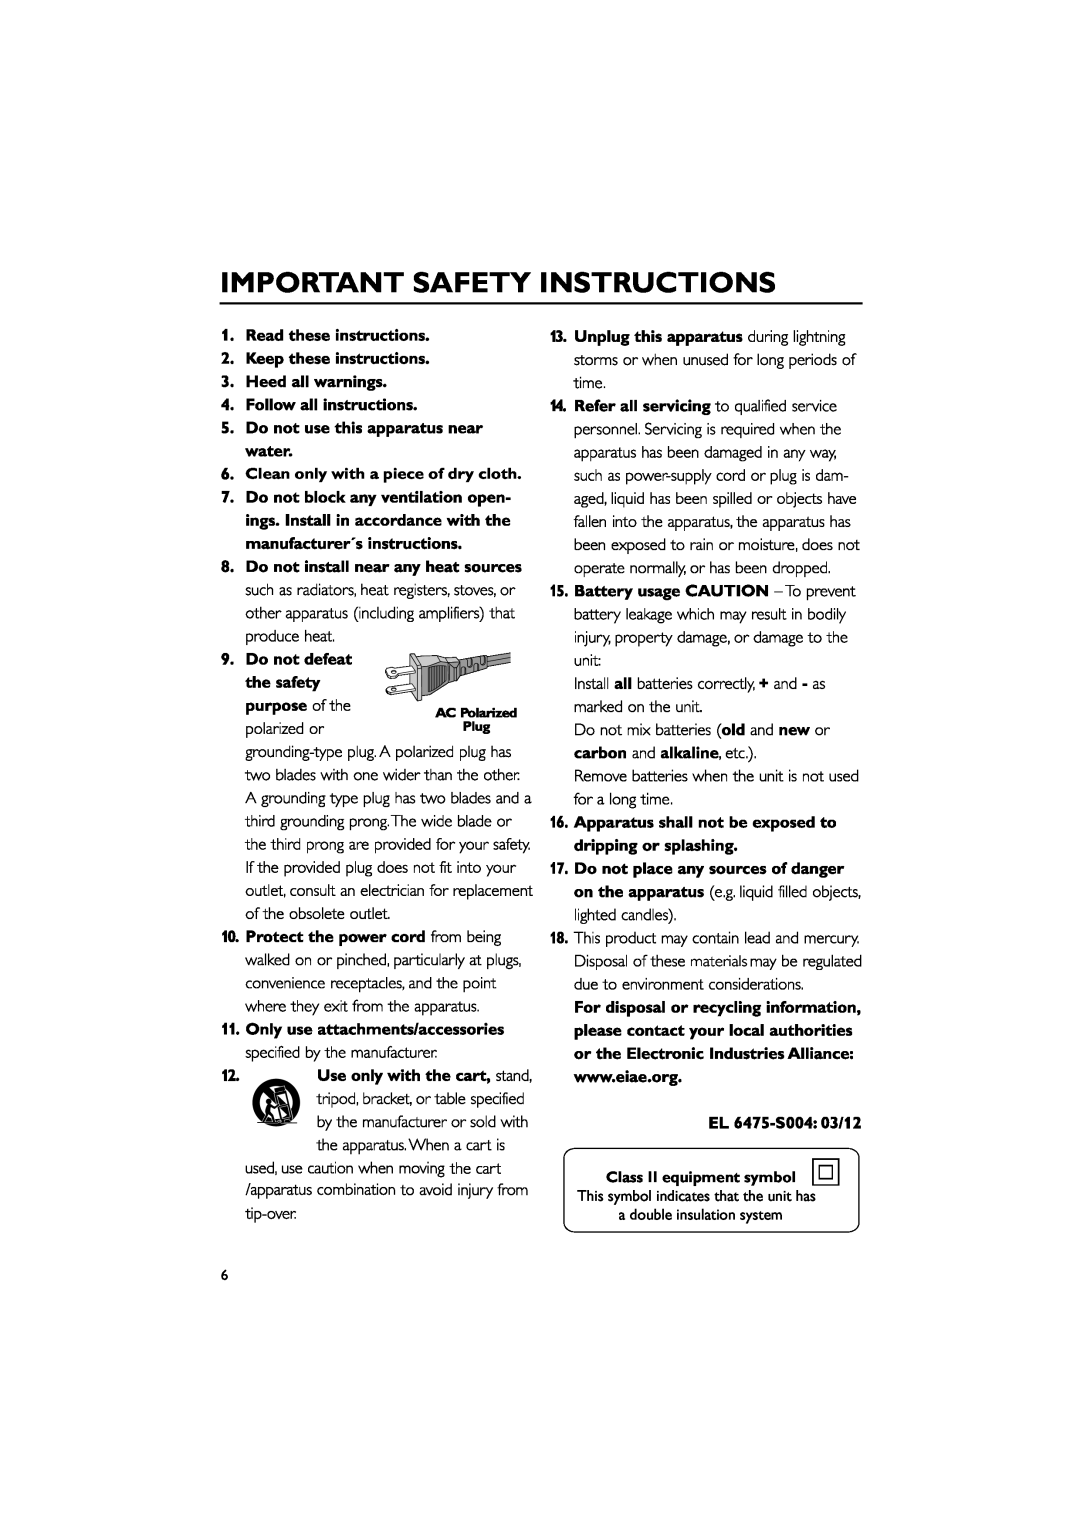 Philips FWM779 warranty Important Safety Instructions, Clean only with a piece of dry cloth 